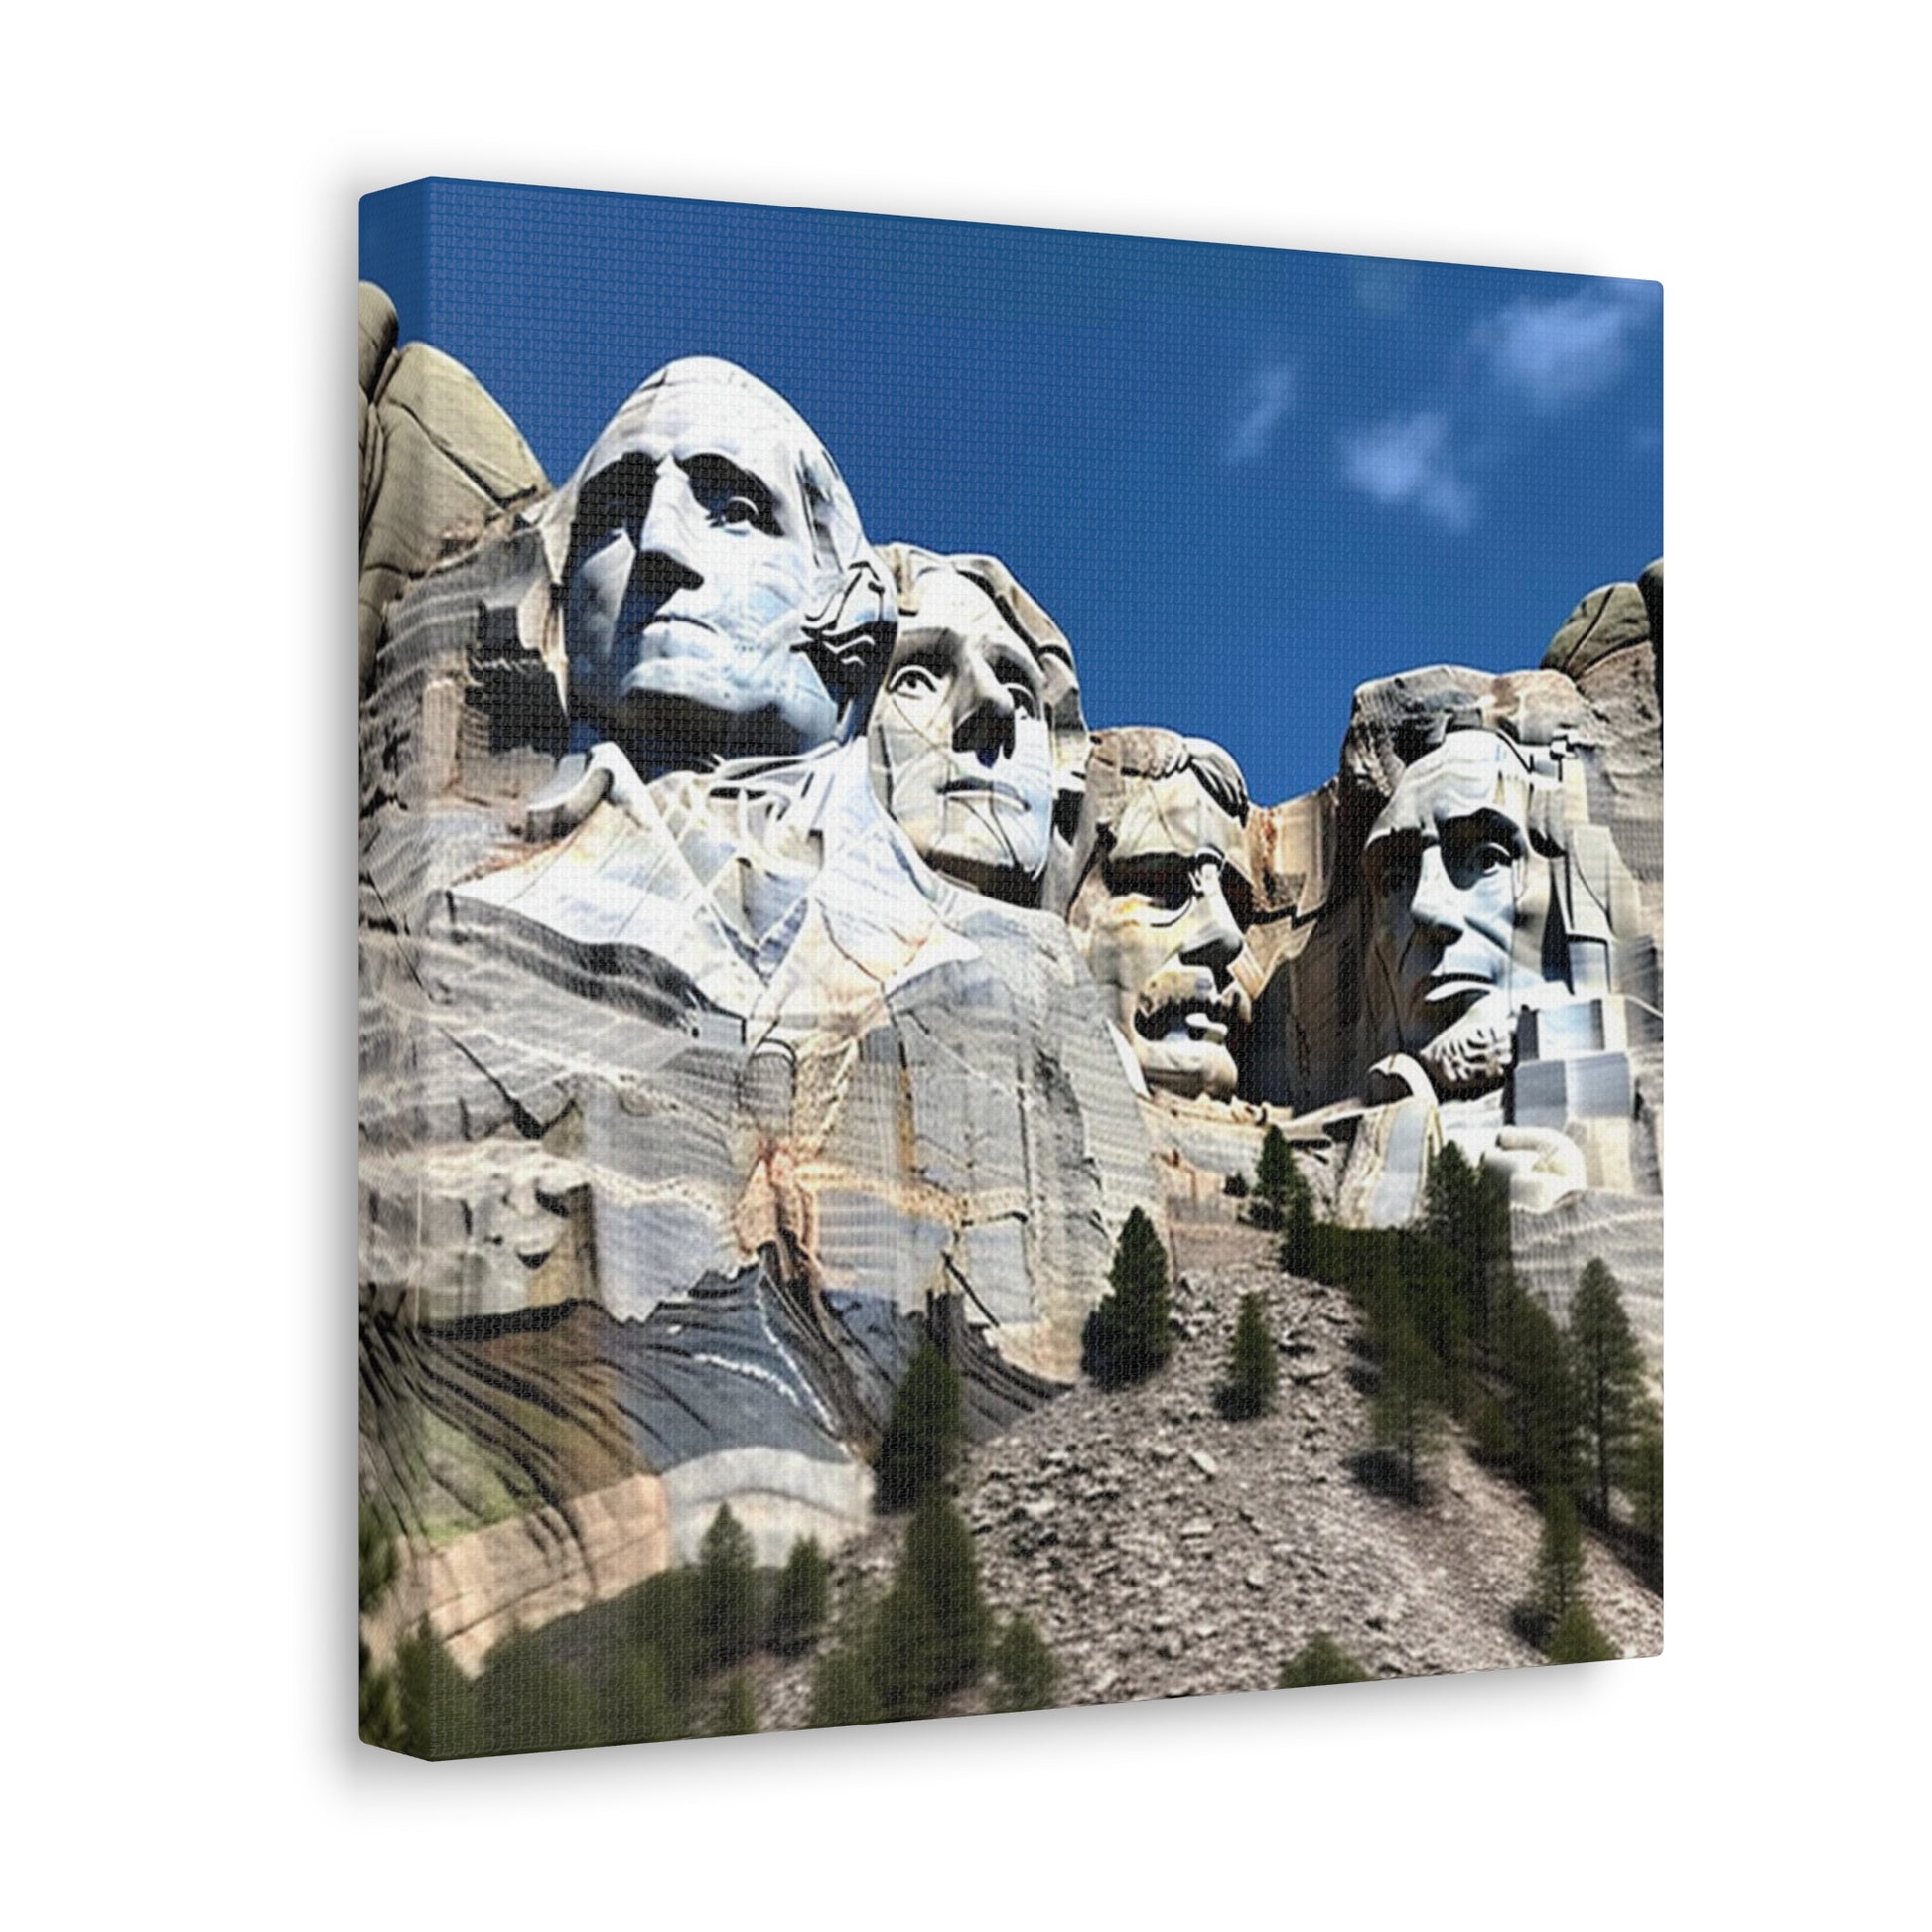 "Mount Rushmore Photo" Wall Art - Weave Got Gifts - Unique Gifts You Won’t Find Anywhere Else!